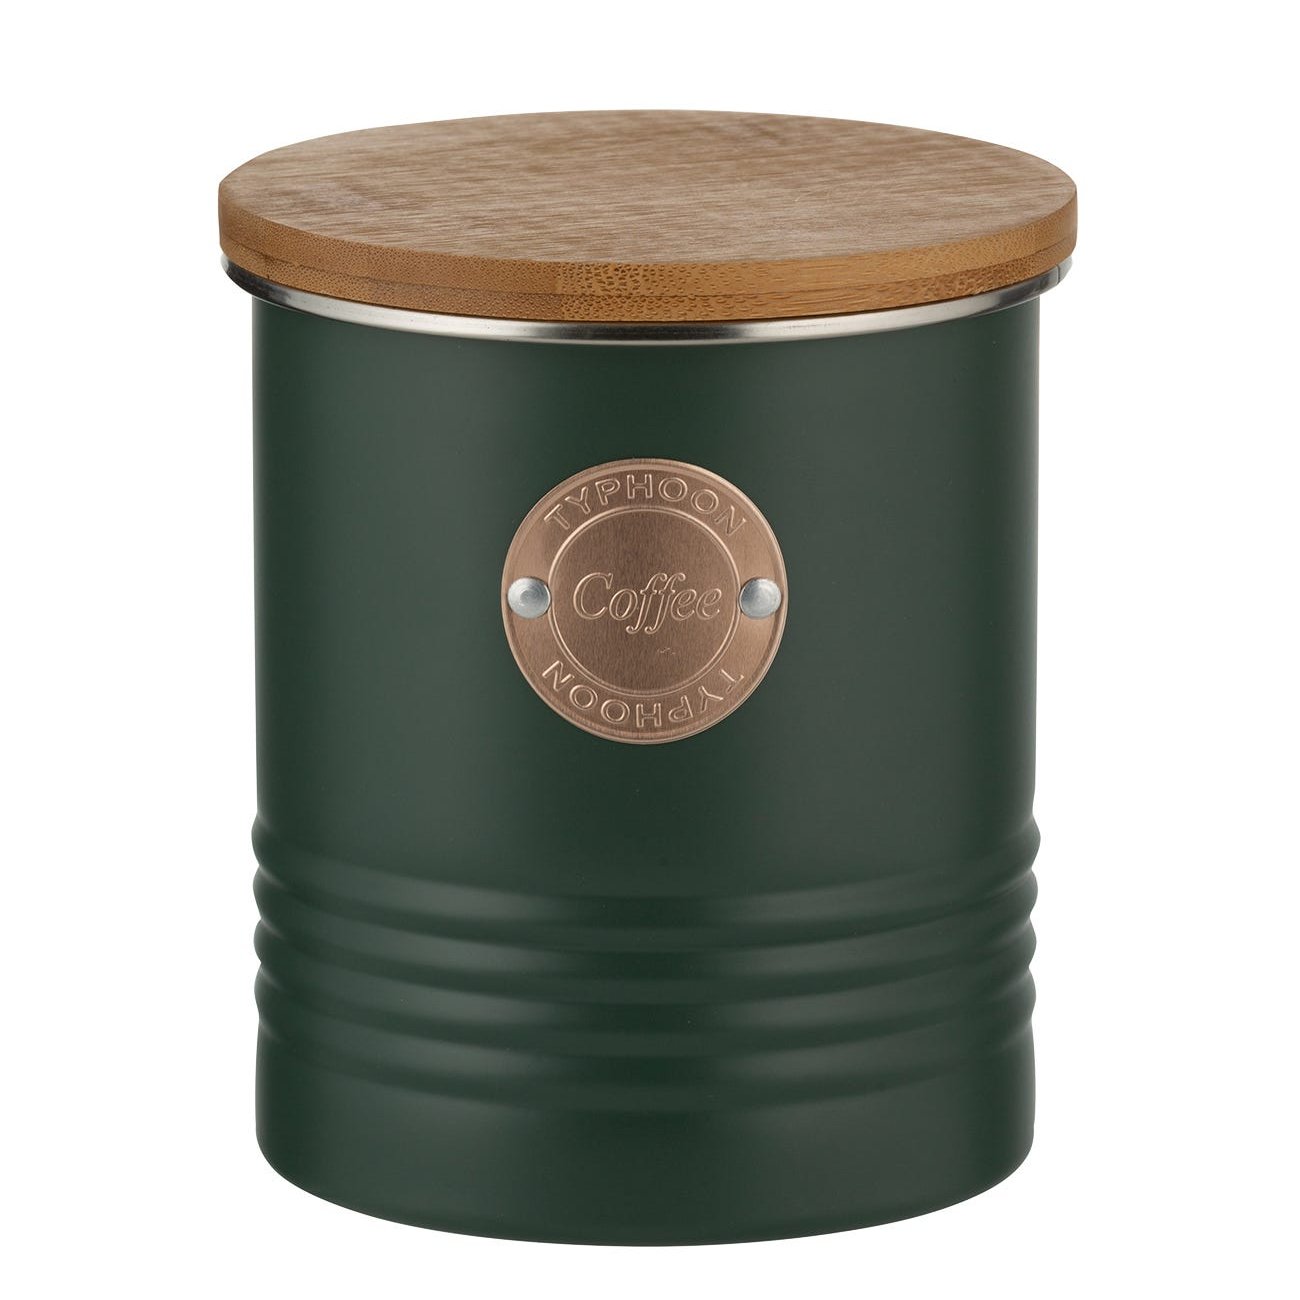 NEW Typhoon Living Coffee Canister Green Steel Seasonal Wrap Now on sale Introduction Carbon 1L